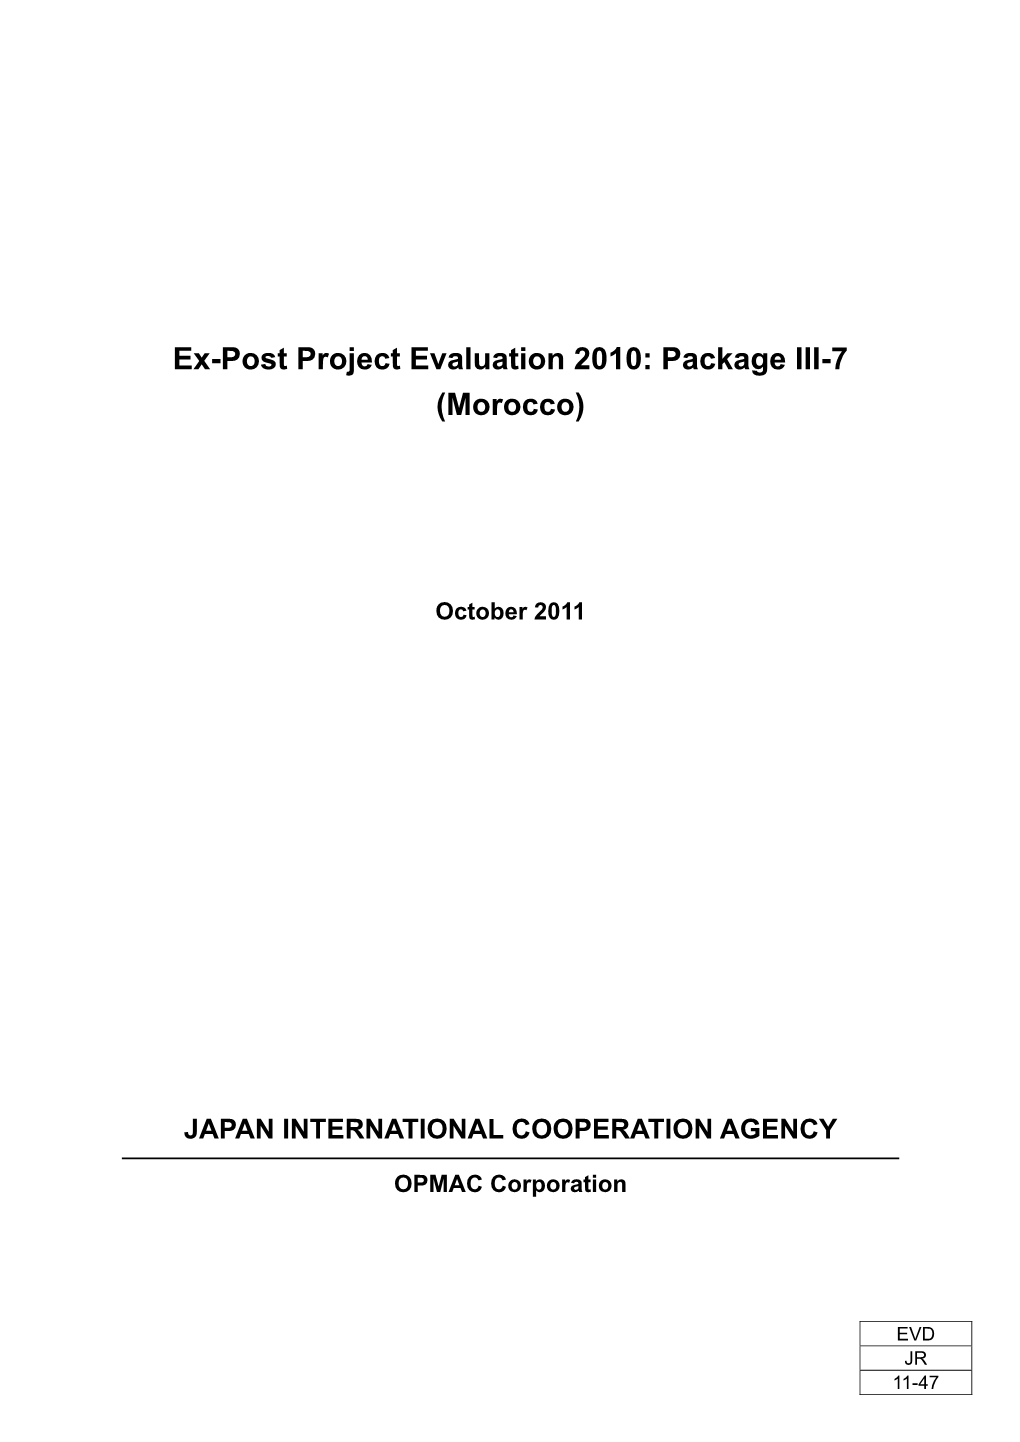 Ex-Post Project Evaluation 2010: Package III-7 (Morocco)